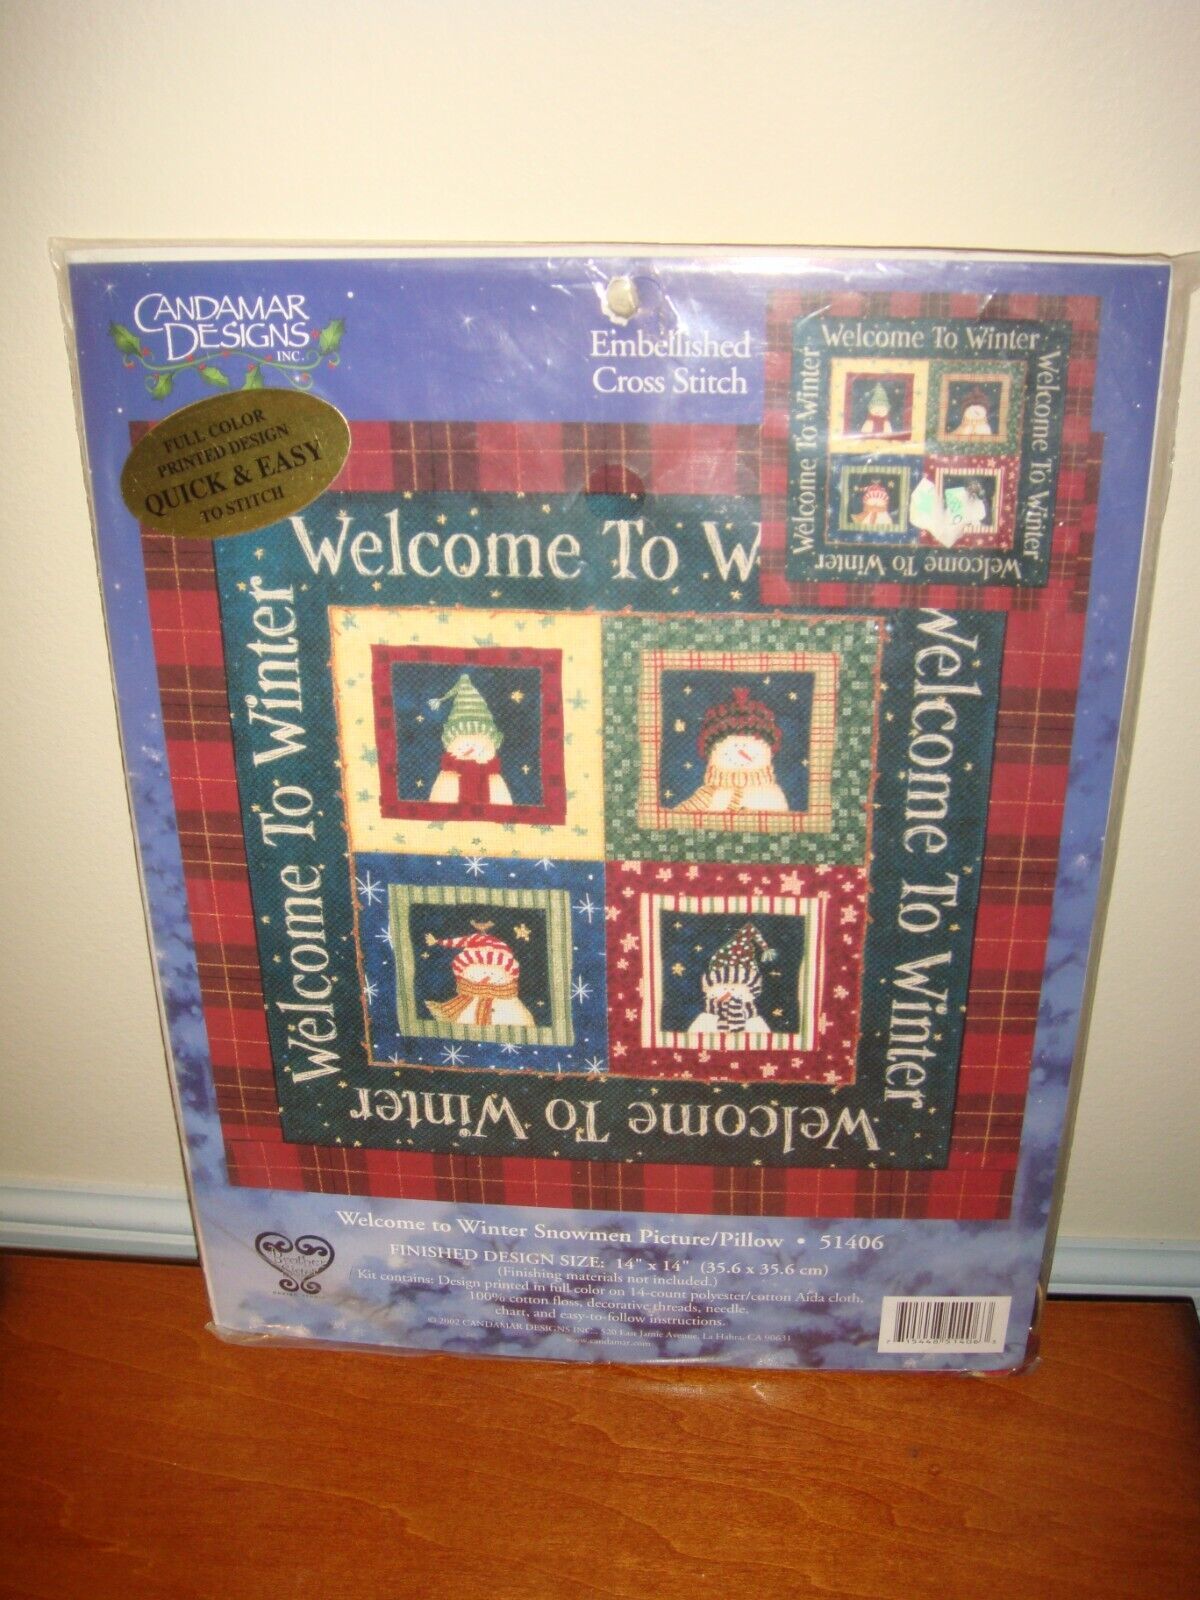 Primary image for Candamar Designs Welcome To Winter Snowman -1 Cross Stitch Kit